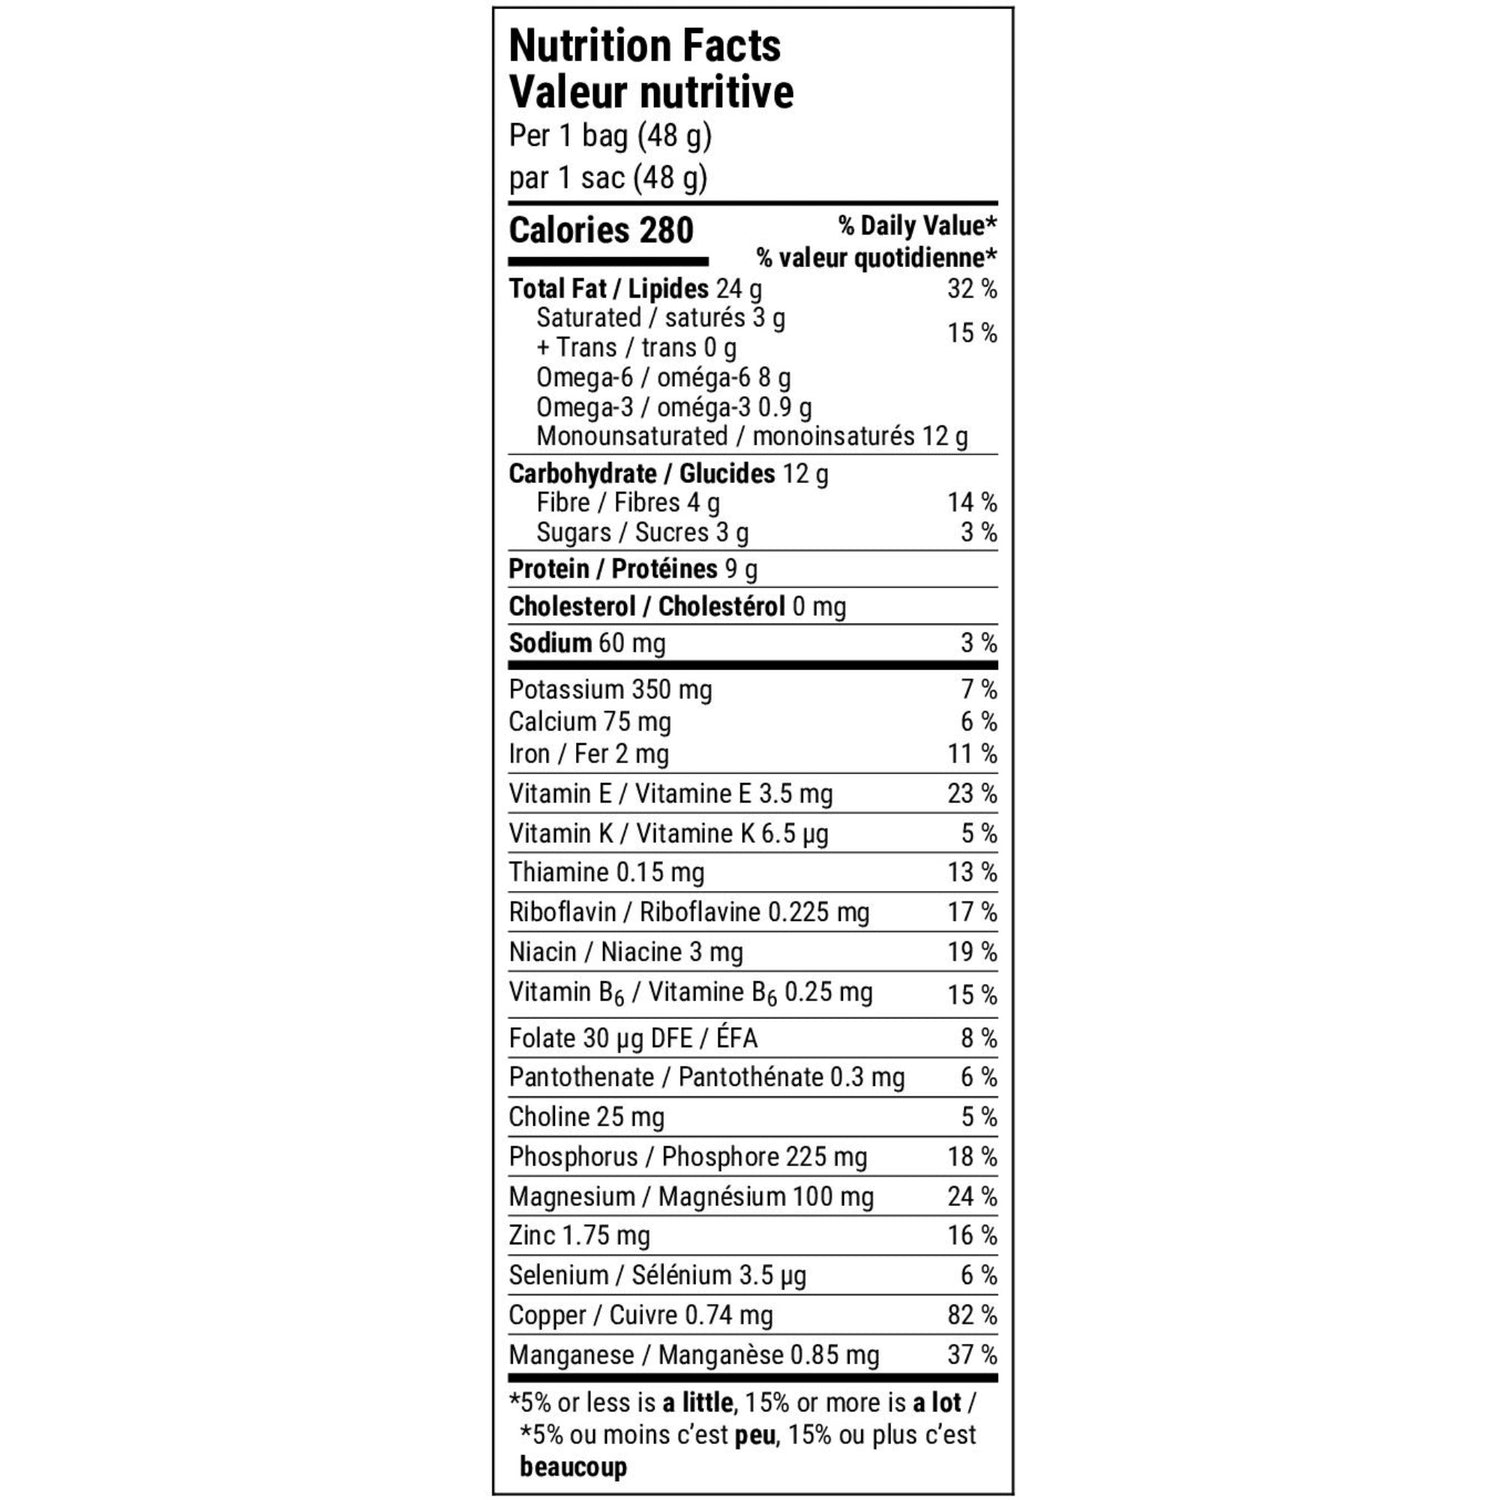 Nutrition Facts Full Detail - Snack On Nuts Flexibility Mixed Nuts Single Pouch Serving - Nutrient Dense Foods, High in copper, magnesium, vitamin E, riboflavin, vitamin B6, zinc, thiamine and iron